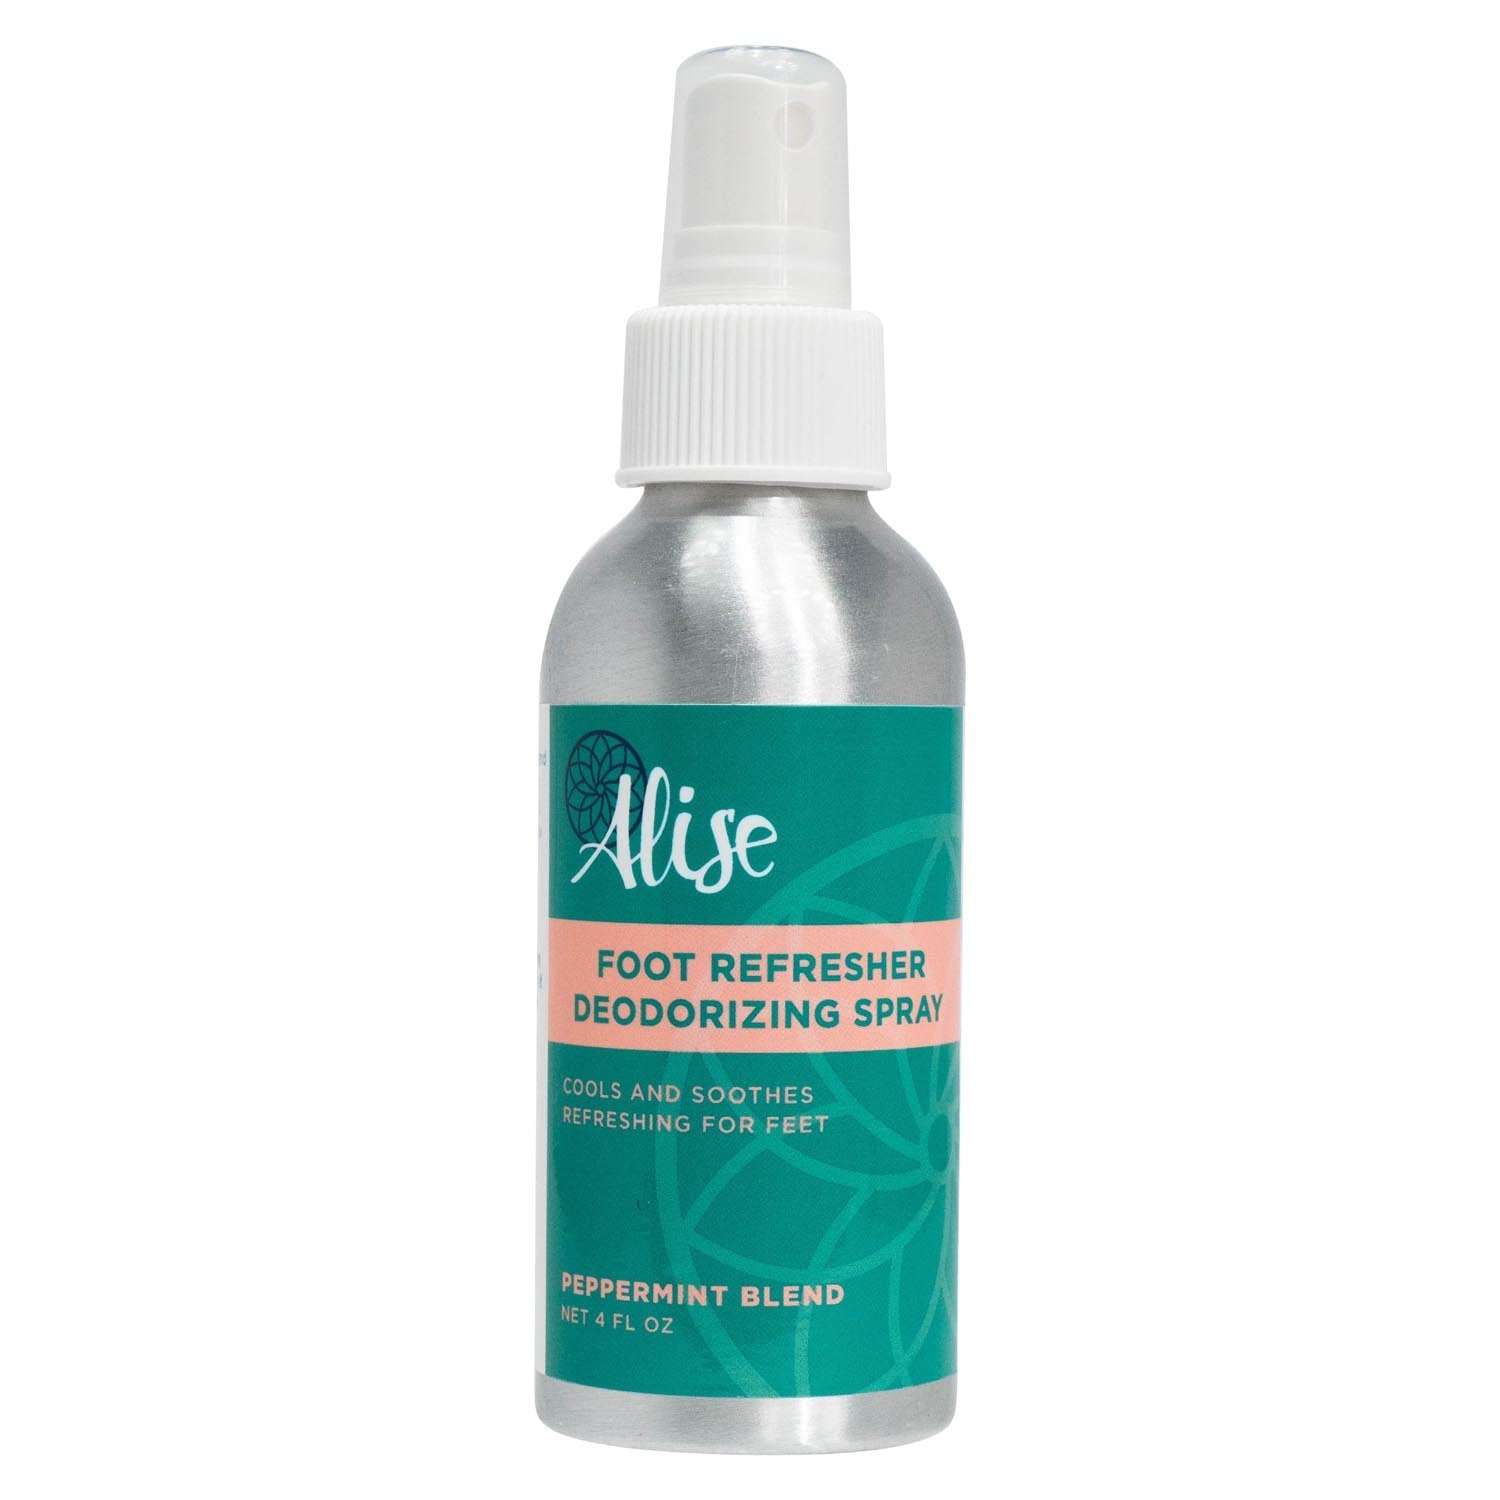 Foot Refresher Deodorizing Spray 4oz handcrafted by Alise Body Care